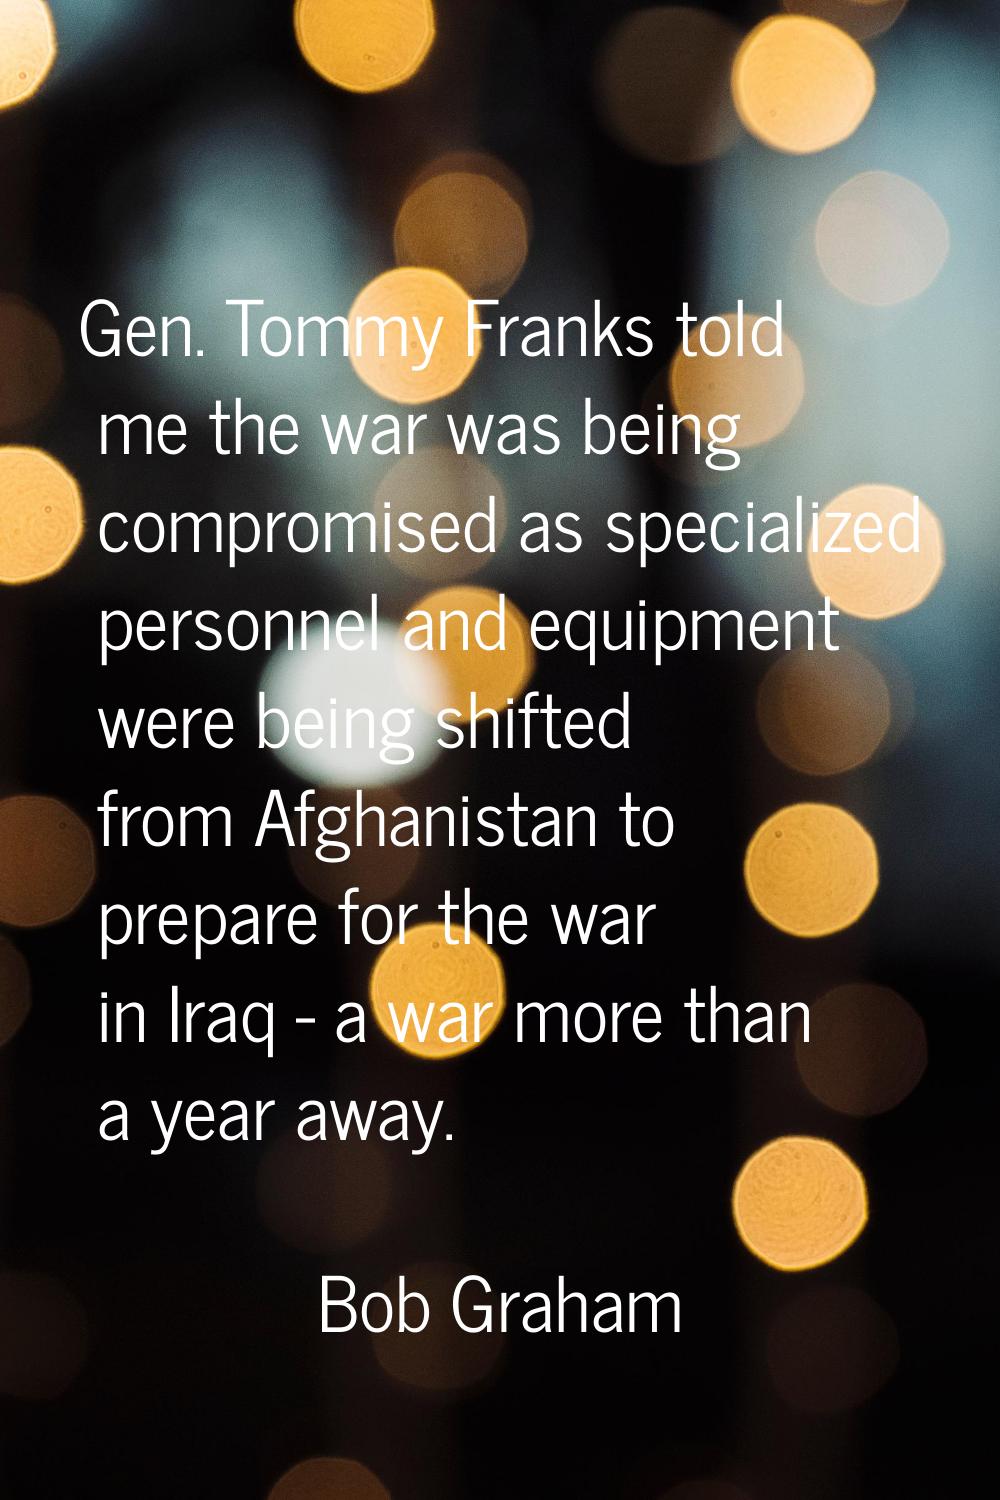 Gen. Tommy Franks told me the war was being compromised as specialized personnel and equipment were